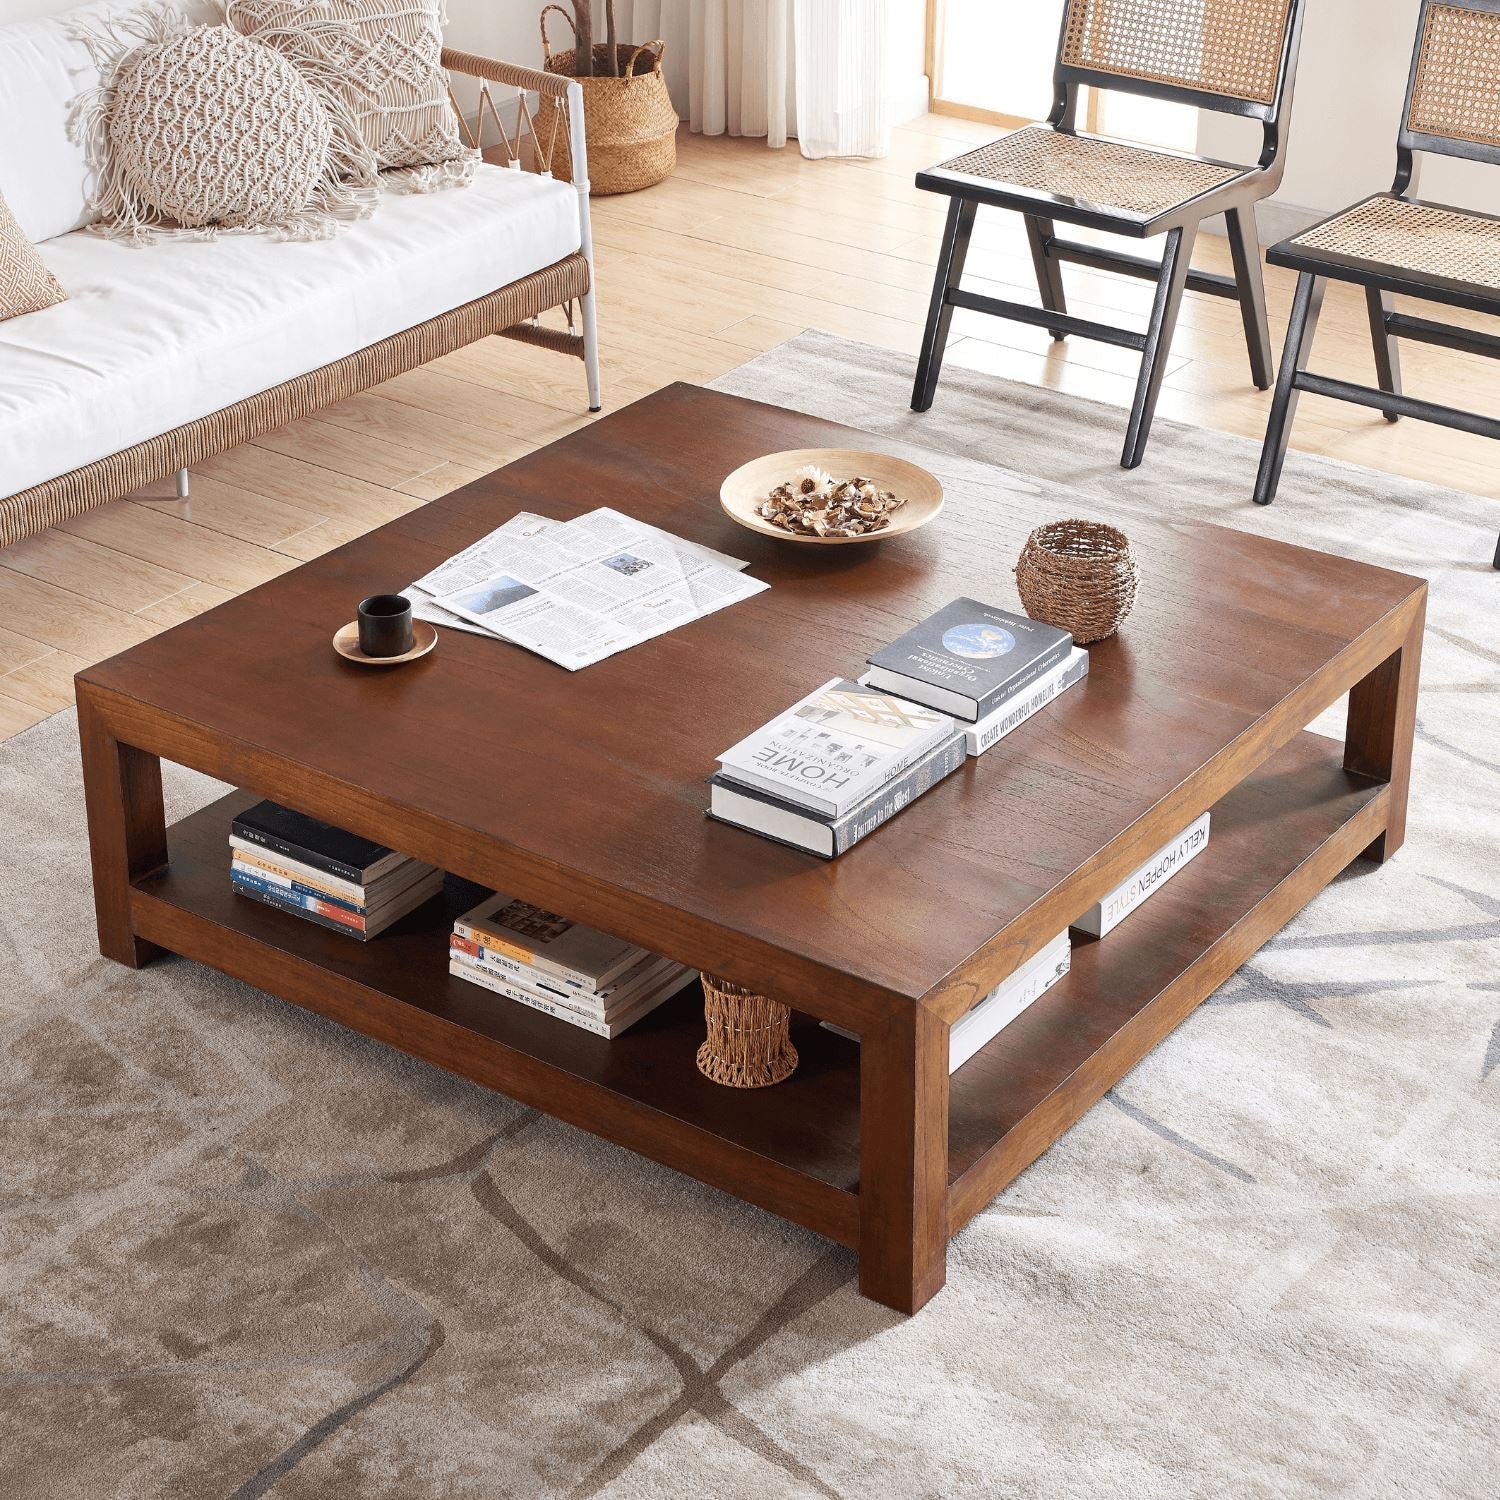 Nimes Coffee Table - Valyou 